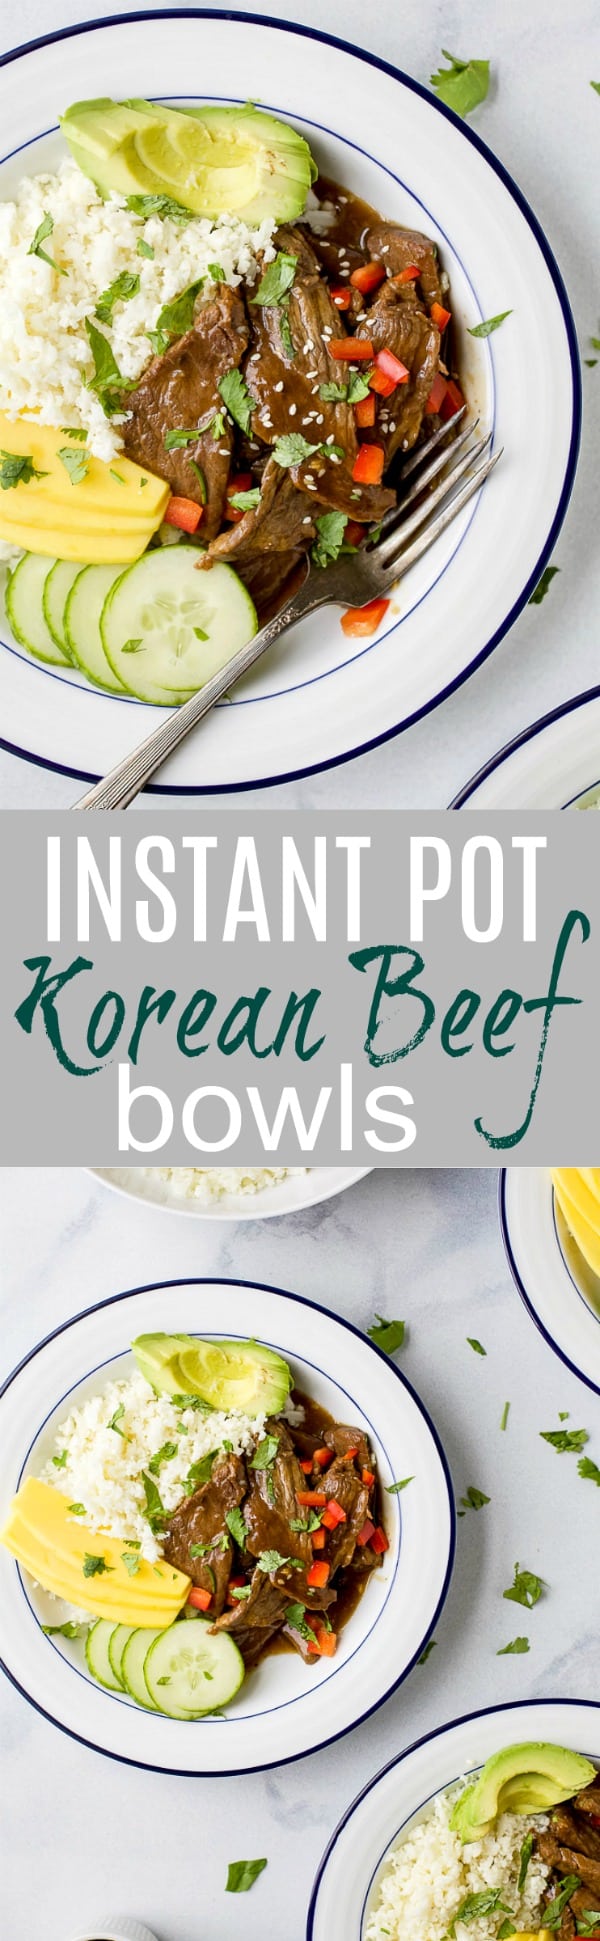 Recipe collage for Instant Pot Korean Beef Bowls